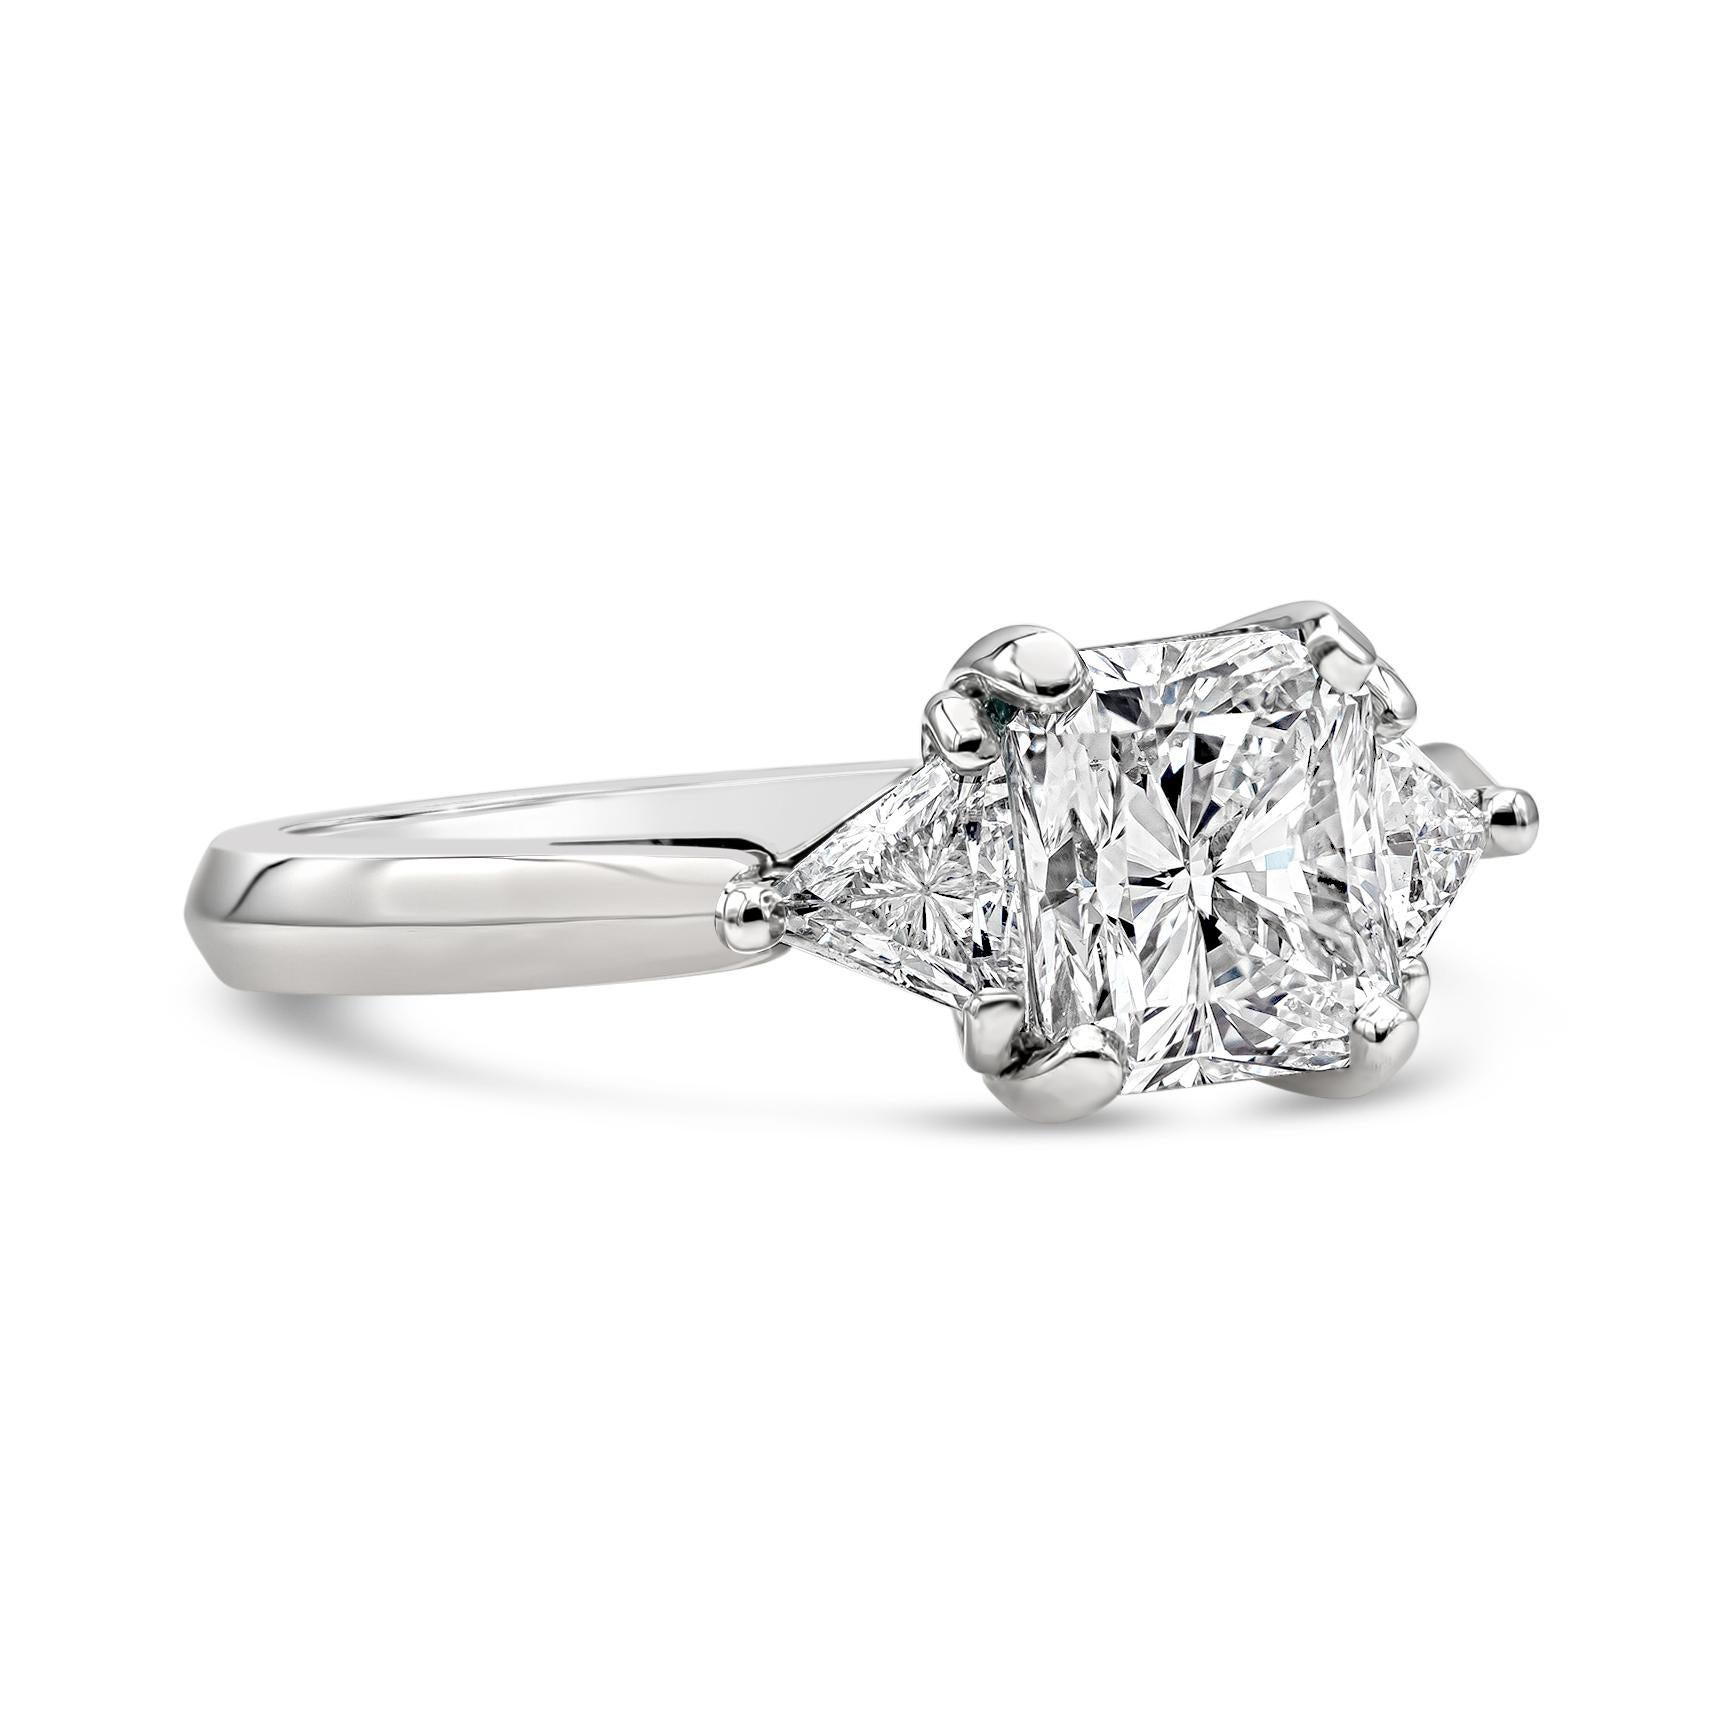 A classic three-stone engagement ring style showcasing a 1.50 carats radiant cut diamond certified by GIA as F color and SI1 in clarity, flanked by two trillion cut diamonds on either side weighing 0.47 carats total. Finely made in platinum. Size 6